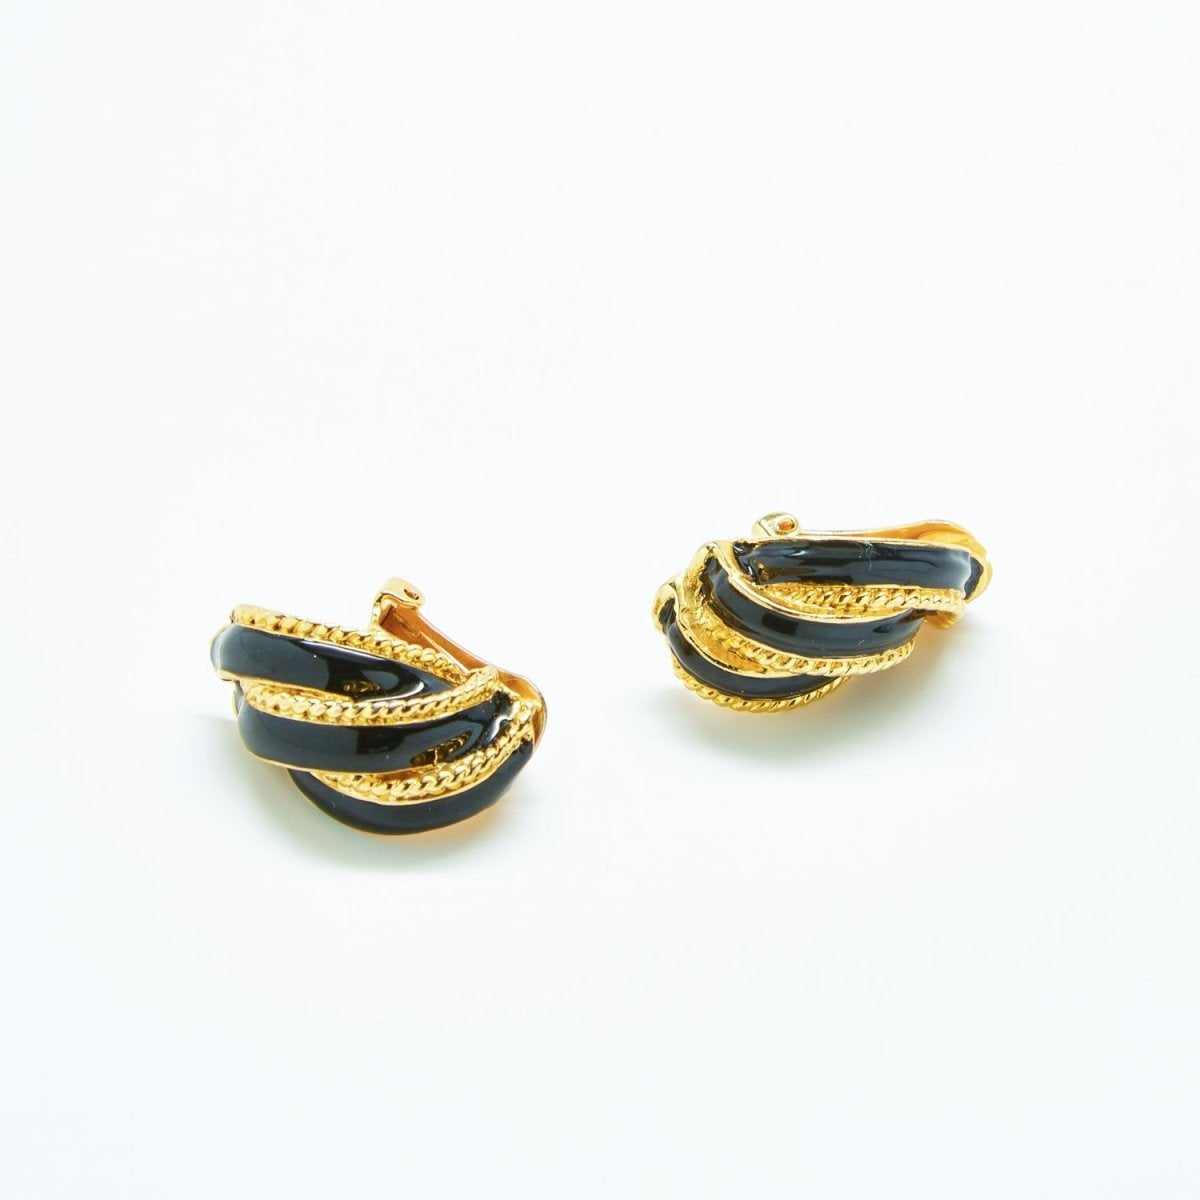 Vintage Black and Gold Ribbon Earrings - Admiral Row